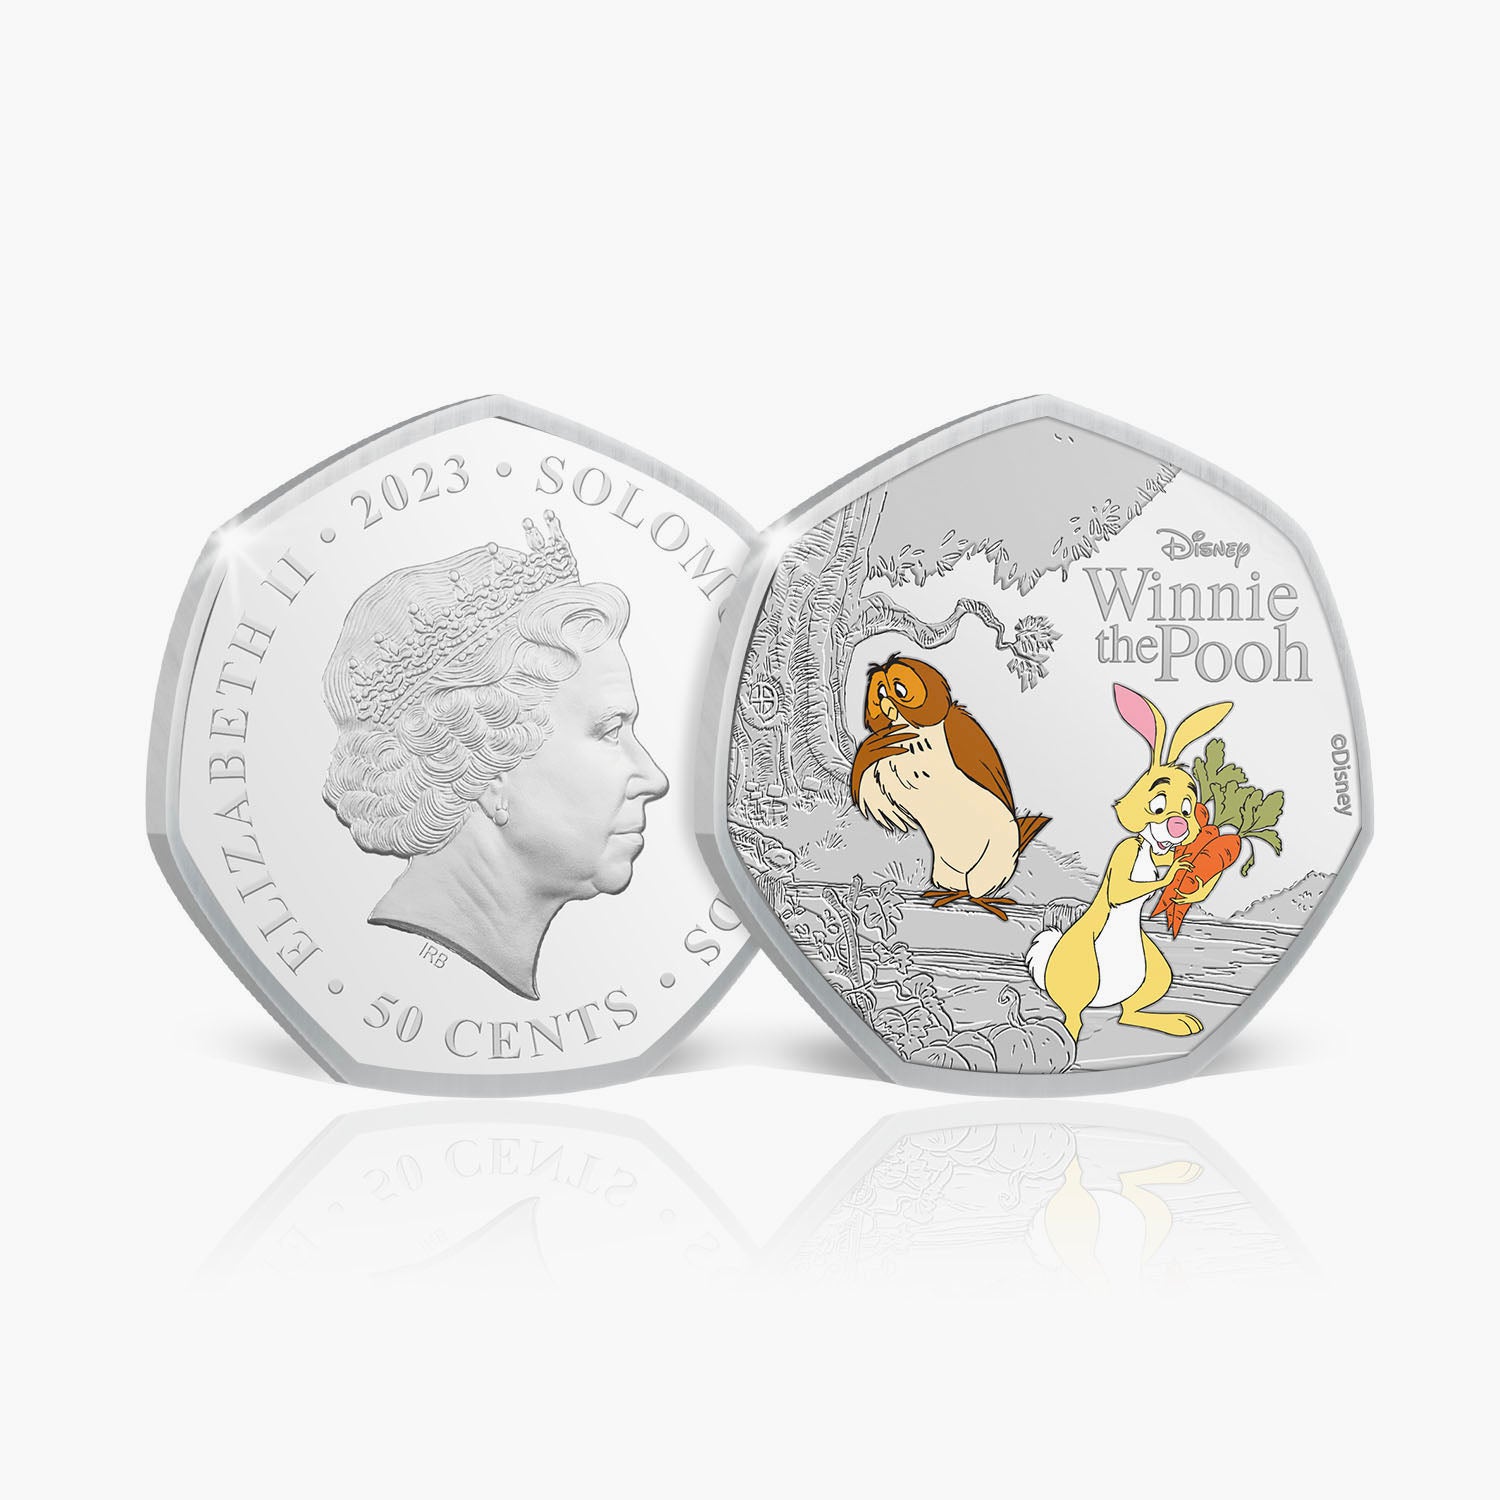 The Winnie the Pooh 2023 Owl and Rabbit Coin